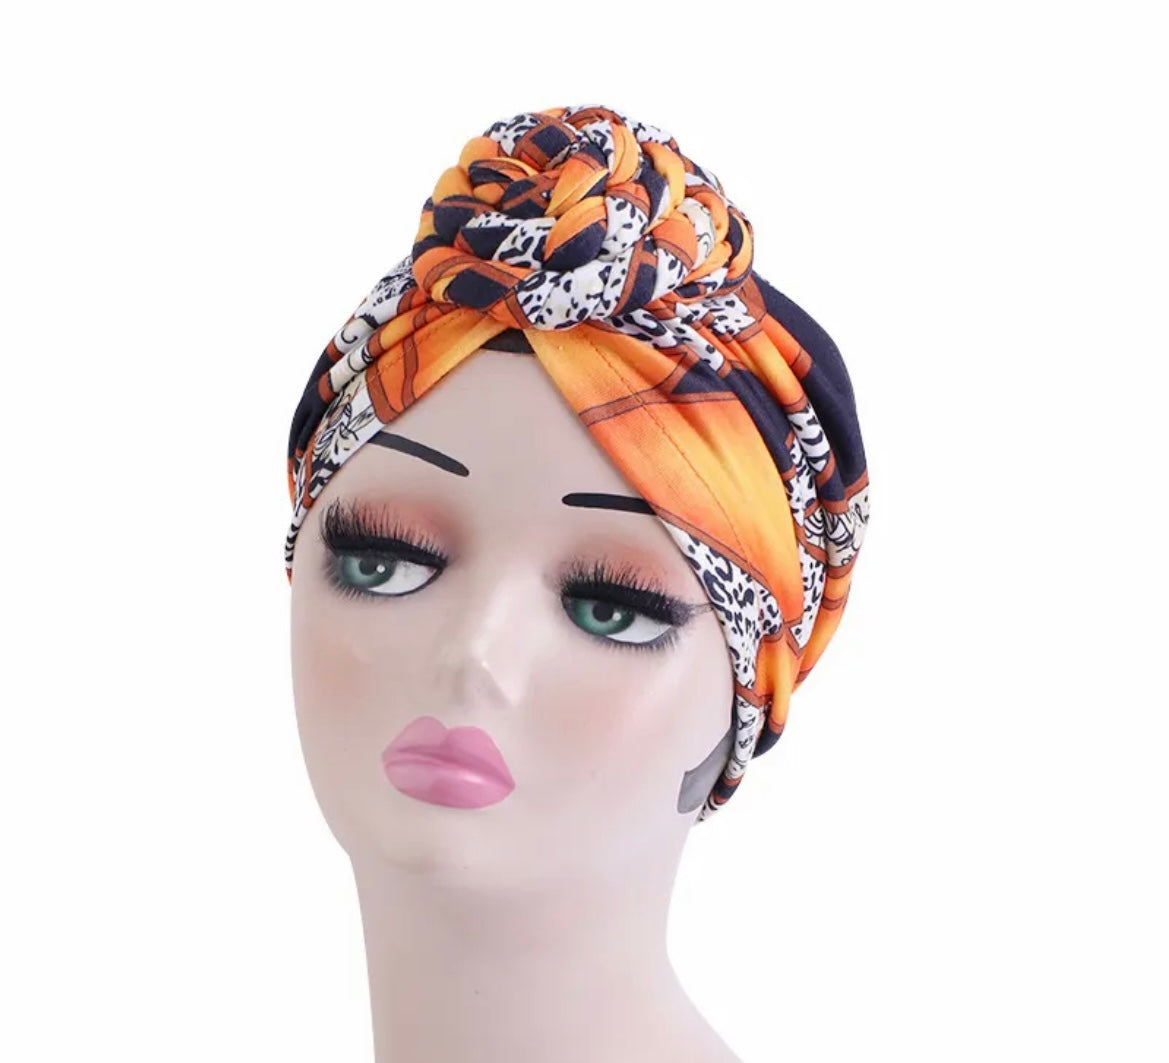 Personalized Hair Wraps, Knotted Ladies Night Cap, Ladies Bonnet, Ethnic Bandanas, Bandanas, Hair Accessories, Hair Caps, Hair Bonnet, Unique Gifts, Gifts for Girls, Gifts for Women